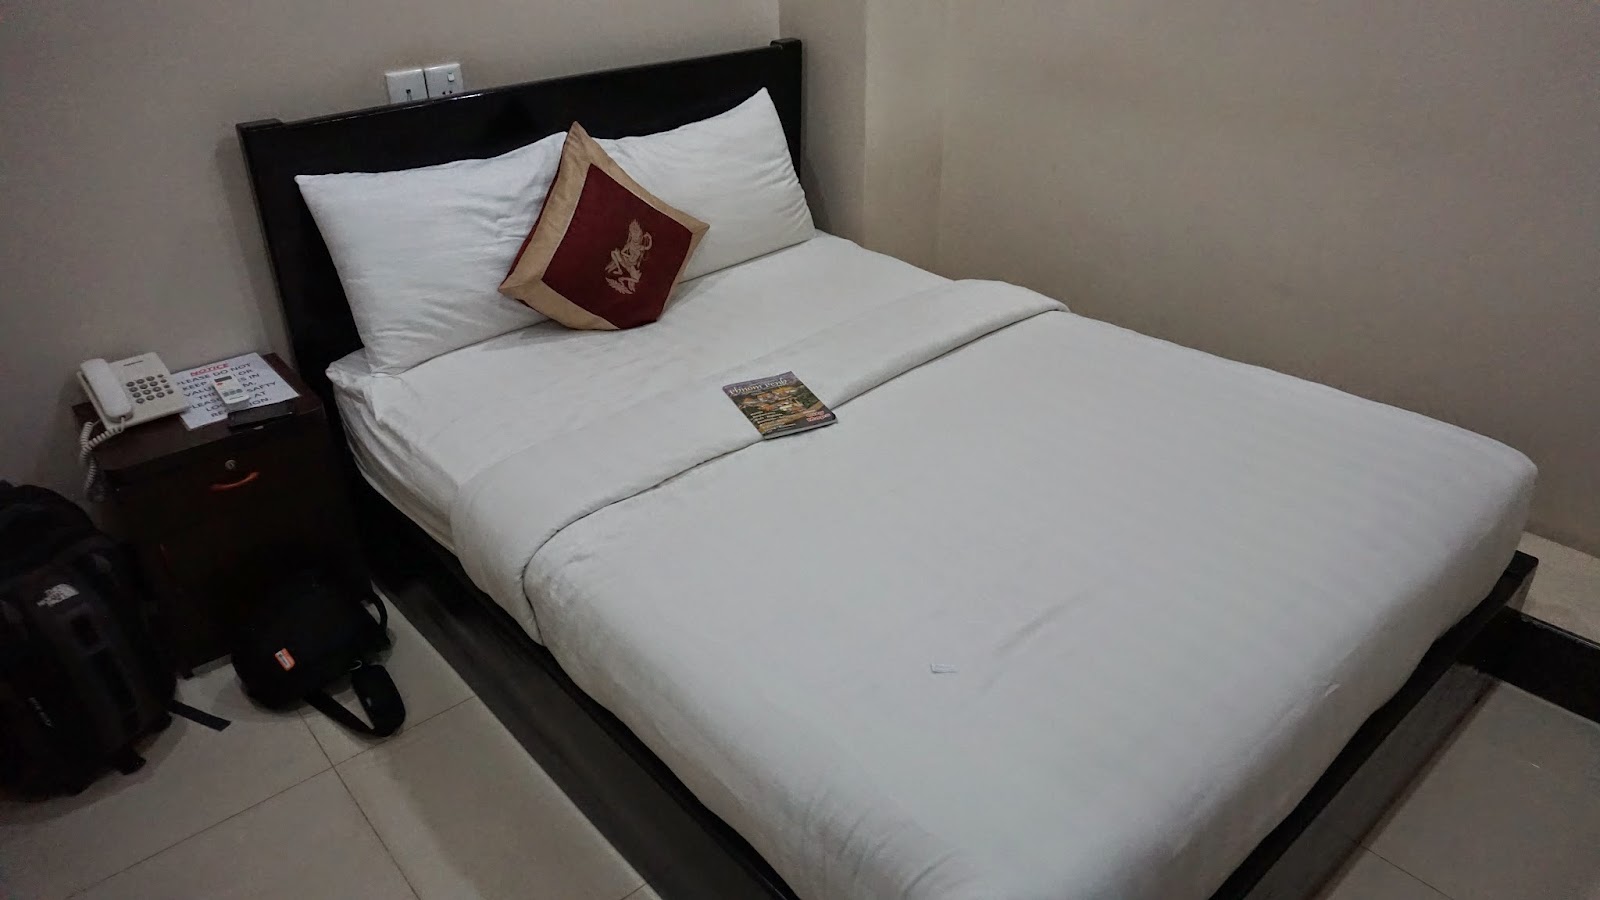 Settling in to my room in Number 9 hotel, Phnom Penh. Comfy and clean, however one thing I didn't like was that the bathroom I got wasn't fully enclosed. It tends to get very humid after I take a shower